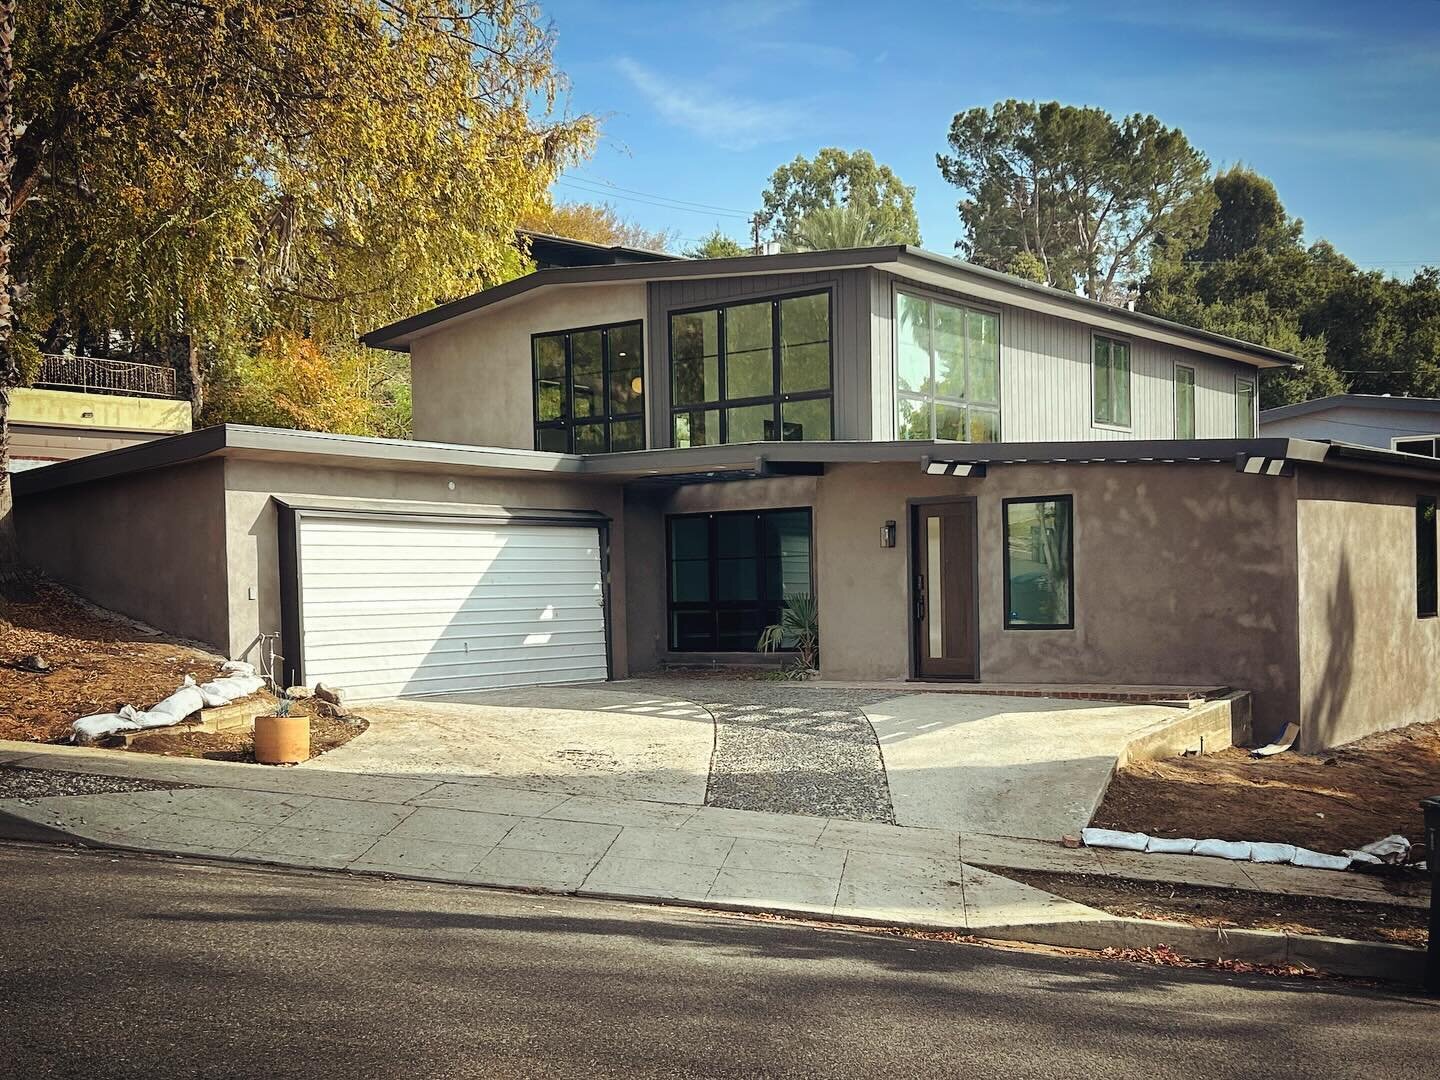 Pasadena mid-century mod remodel nearing completion, just need a new garage door, landscaping &amp; site work.

#brockitecture #ryanbrockettarchitect #architect #architecture #arch #design #interiors #residential #commercial #centralcoast #slocounty 